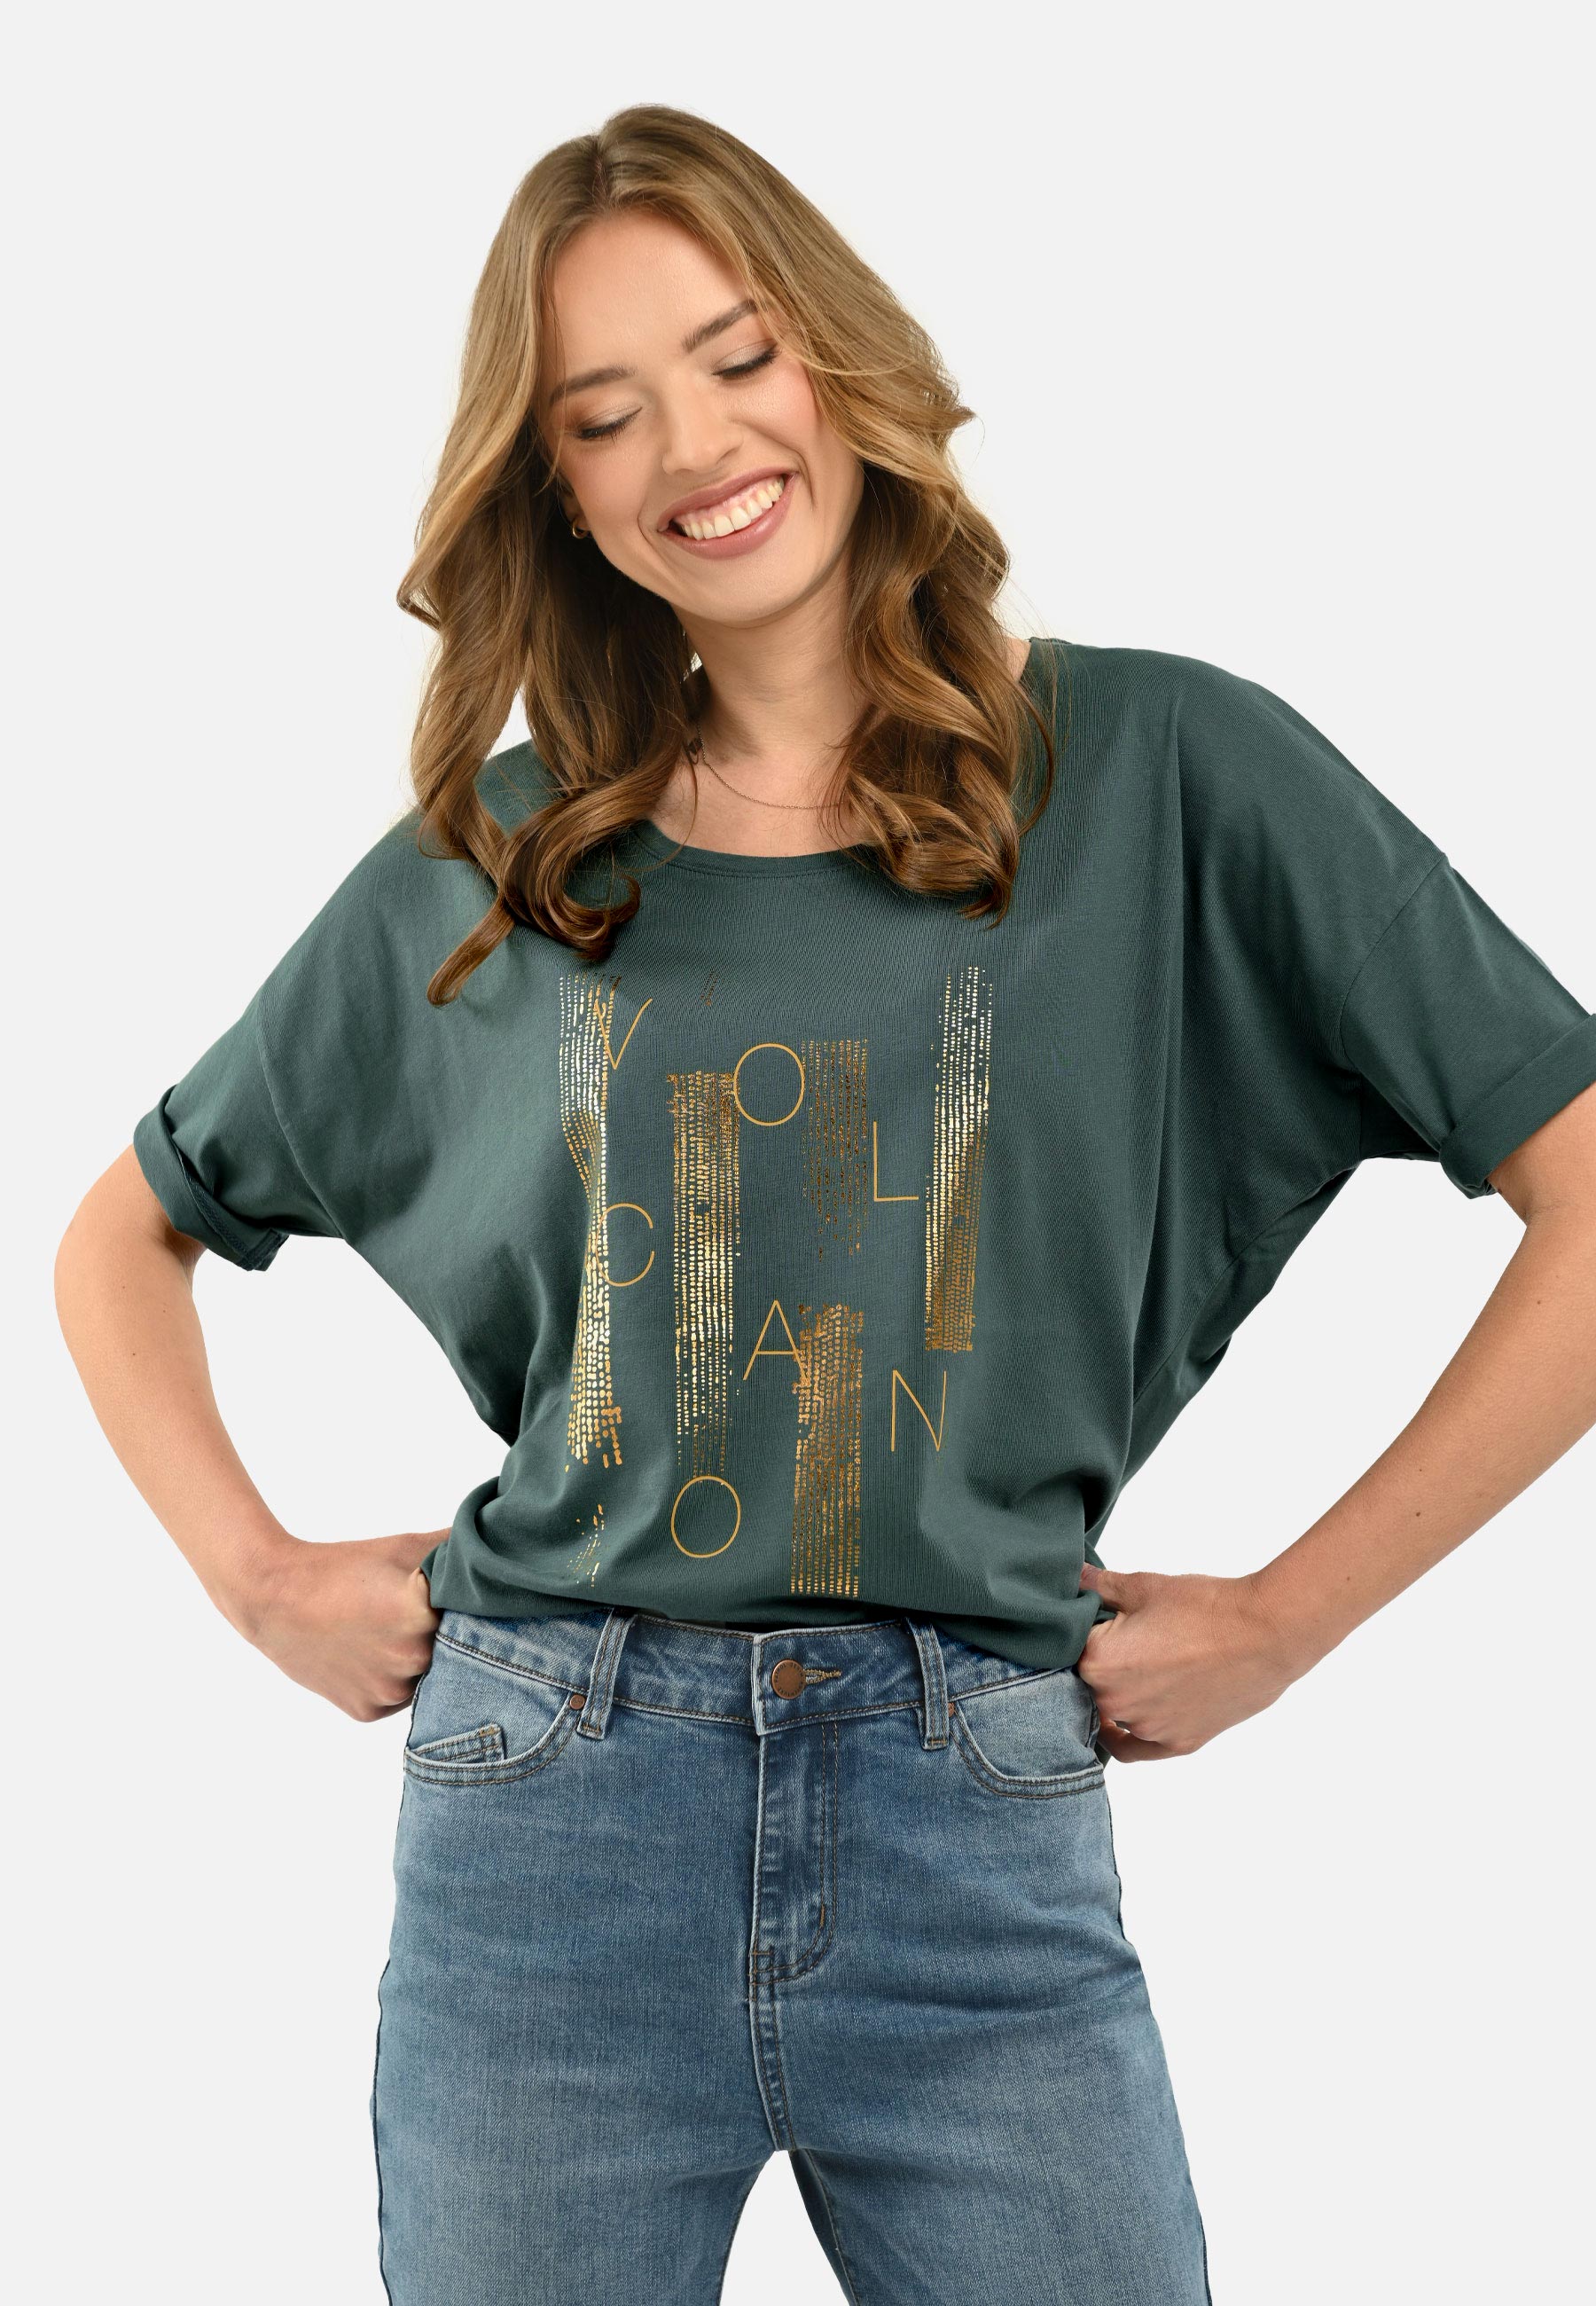 Volcano Woman's T-Shirt T-Can